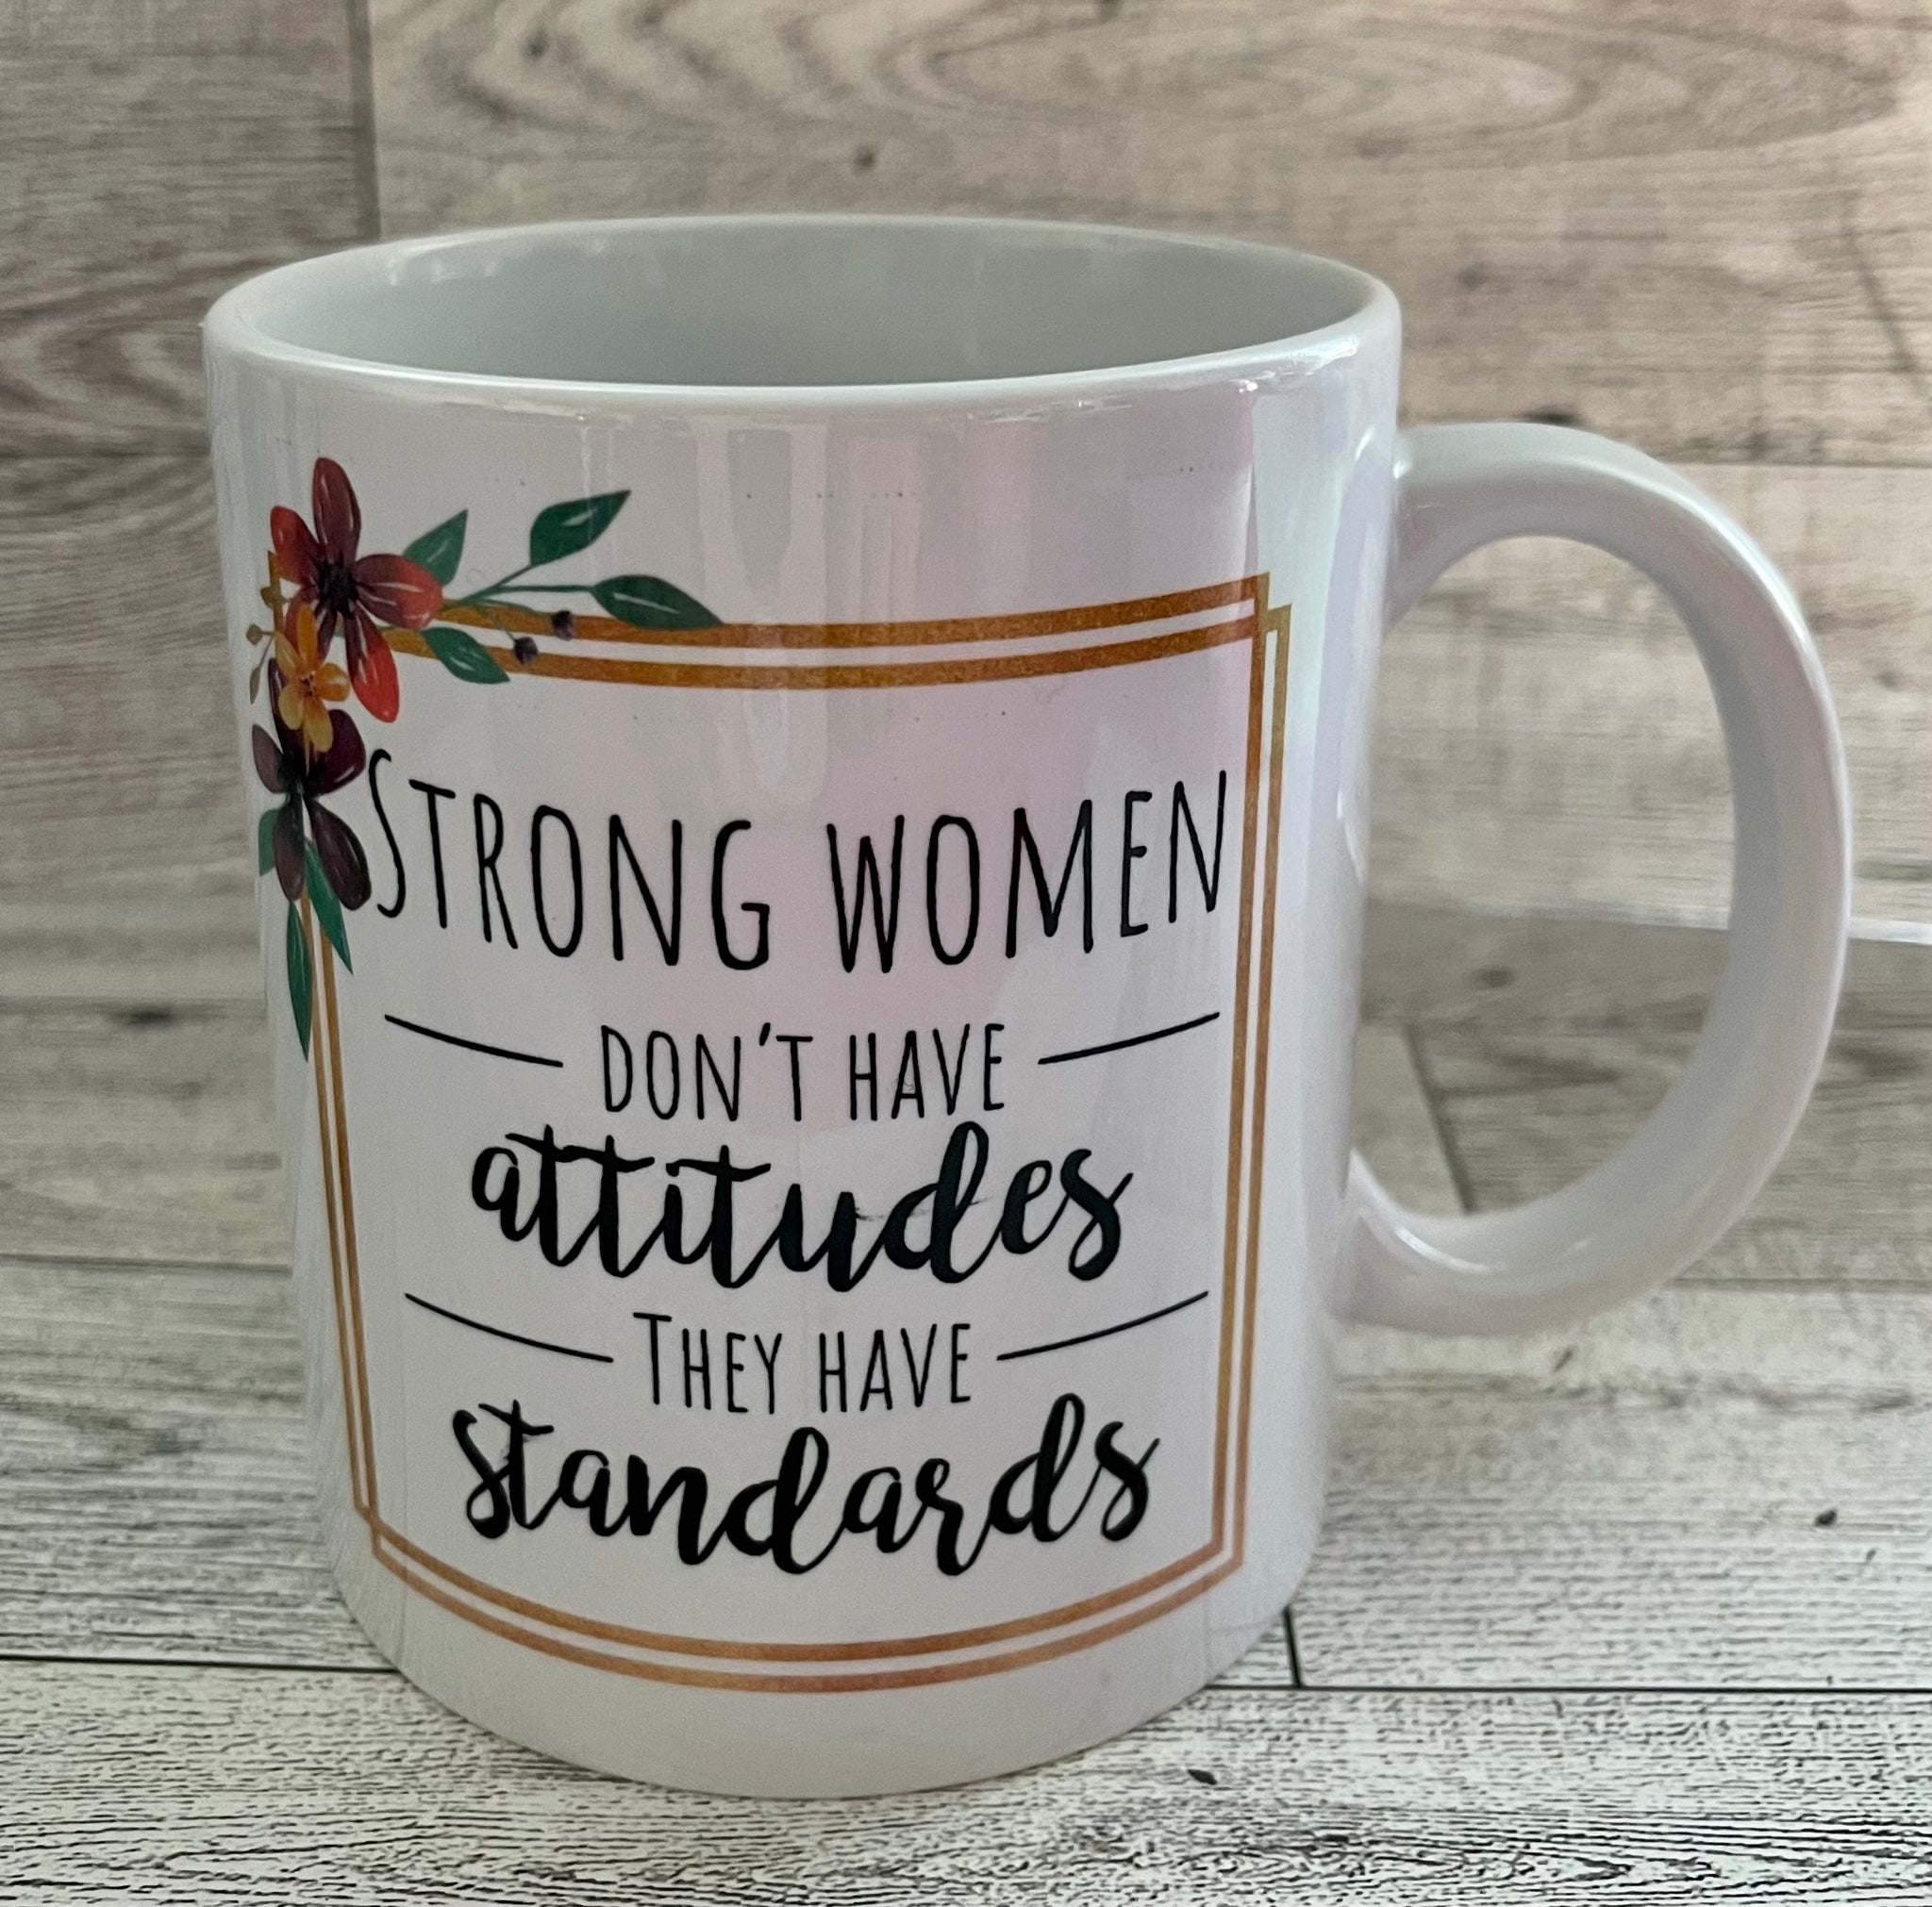 Strong women don’t have attitude they have standards coffee mug